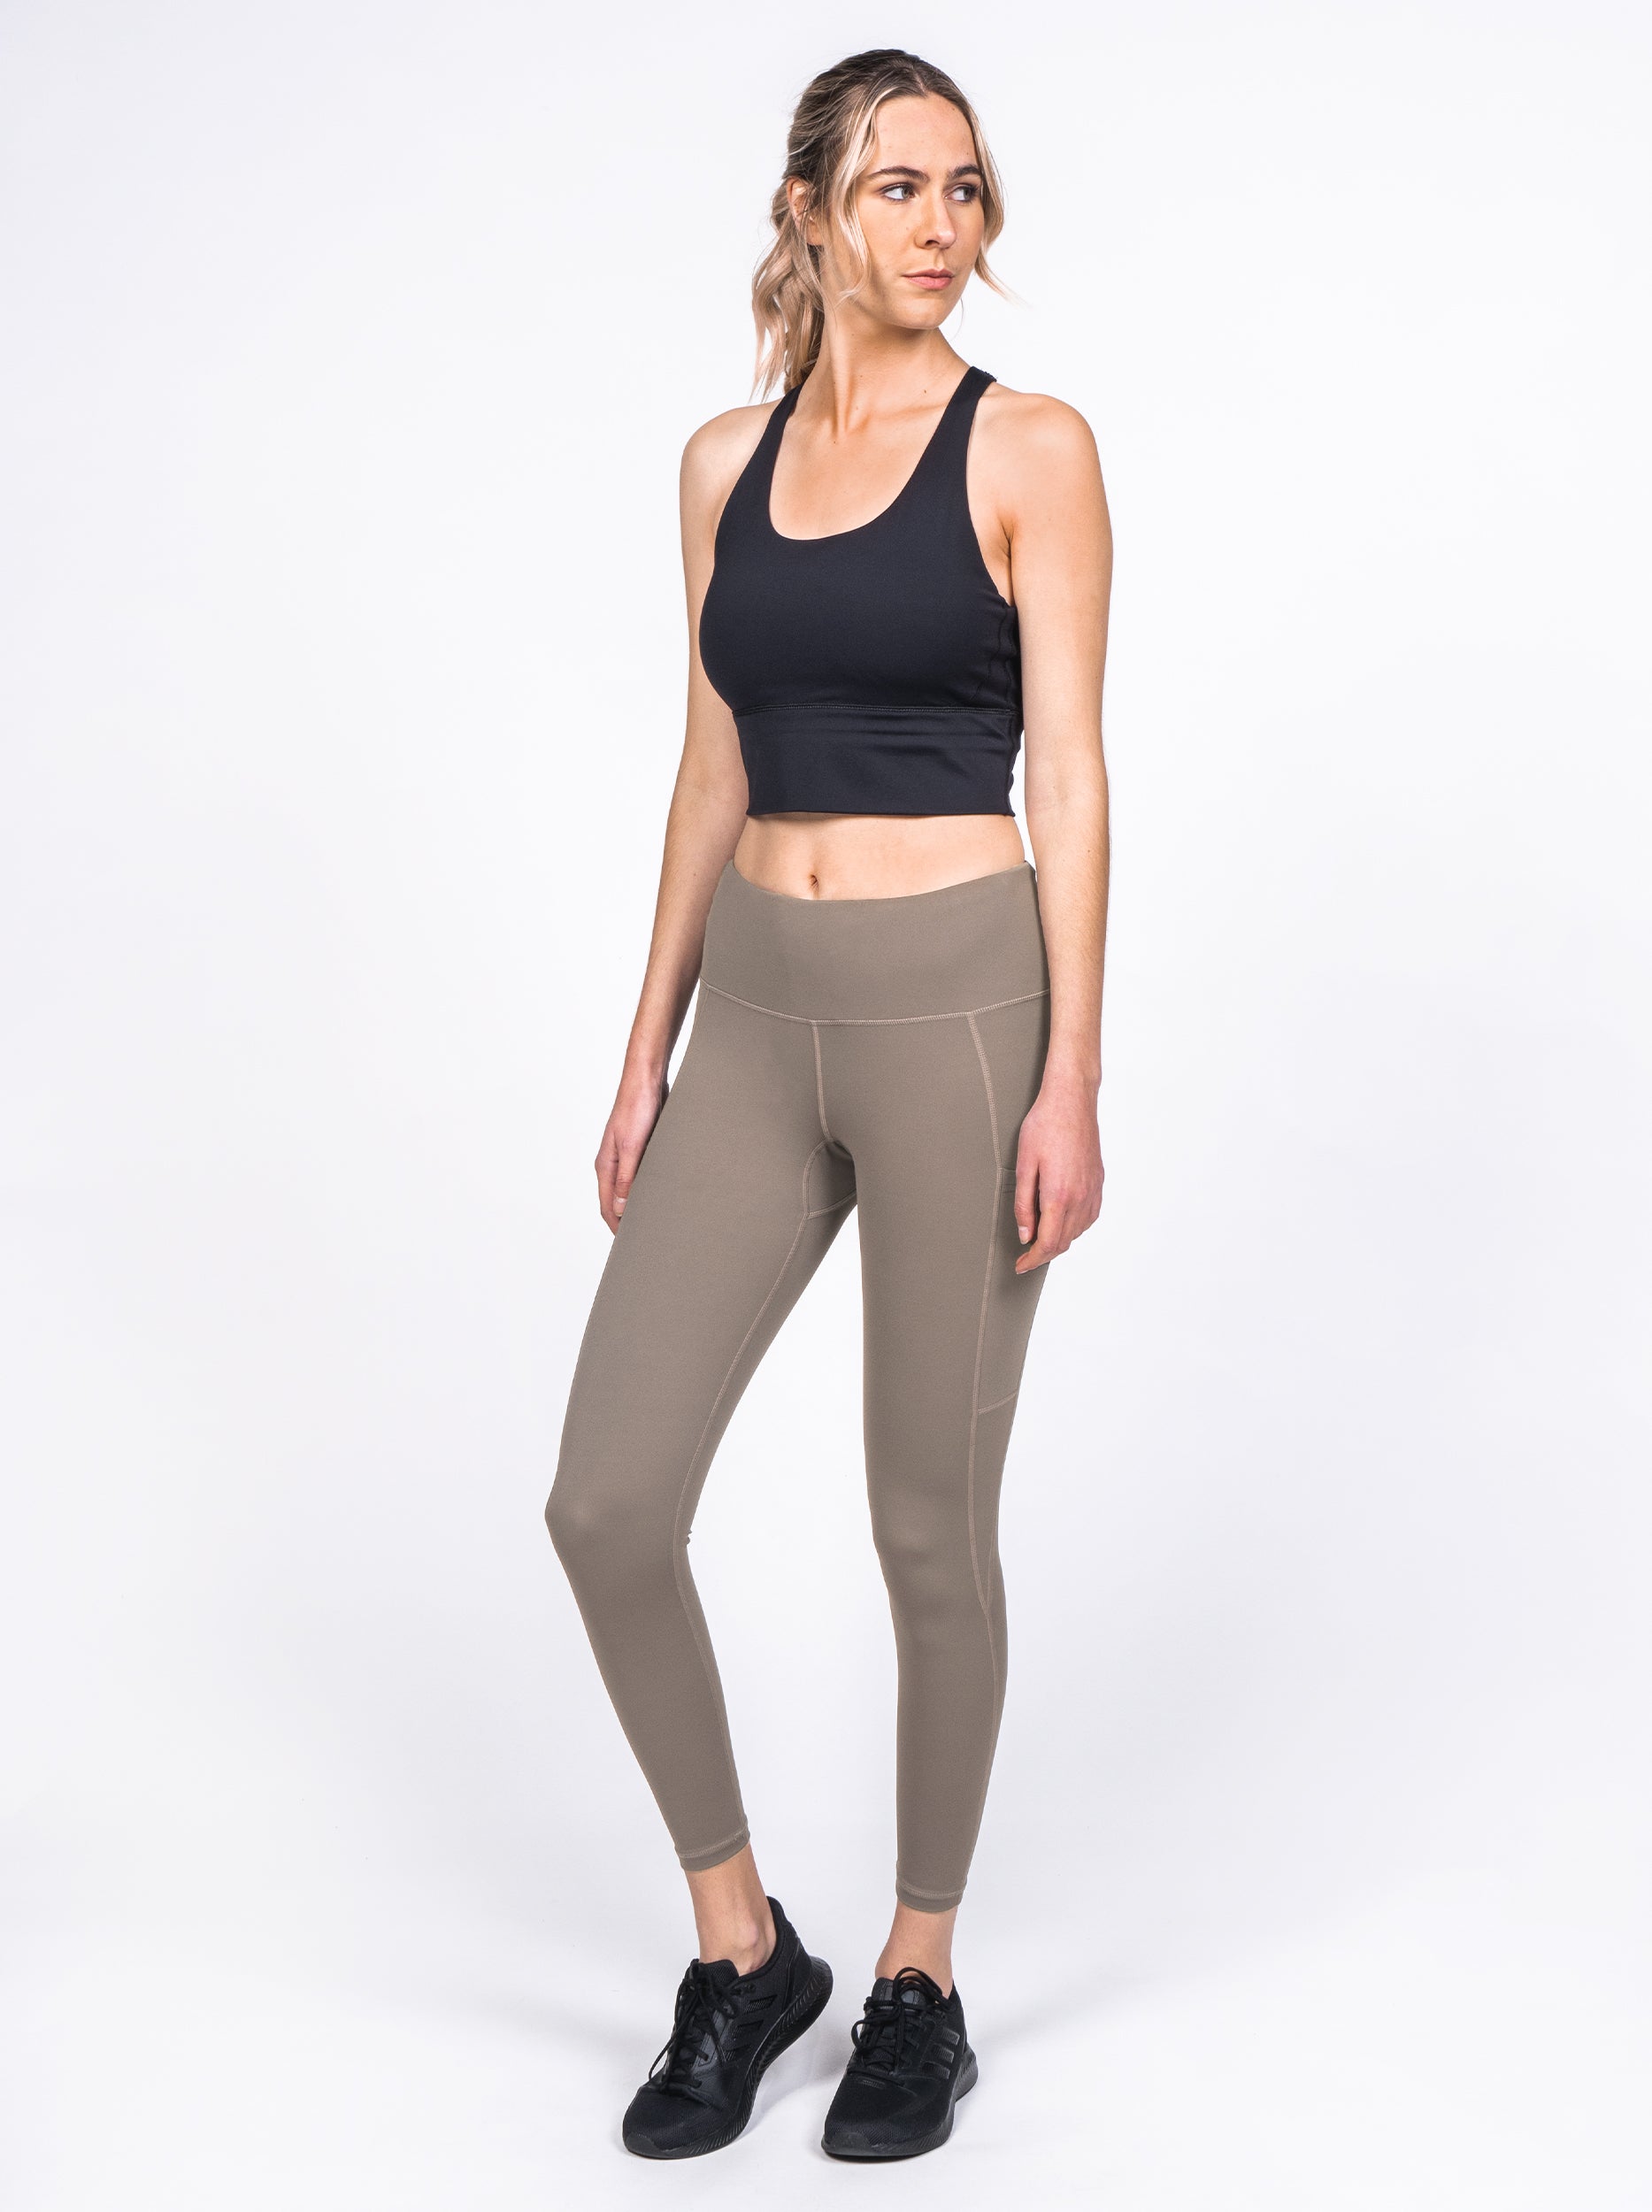 Hunters Element, Signature Hunters Leggings, 4-Way Stretch For  Unrestricted Movement Hunting Leggings, Body-Sculpting Fit